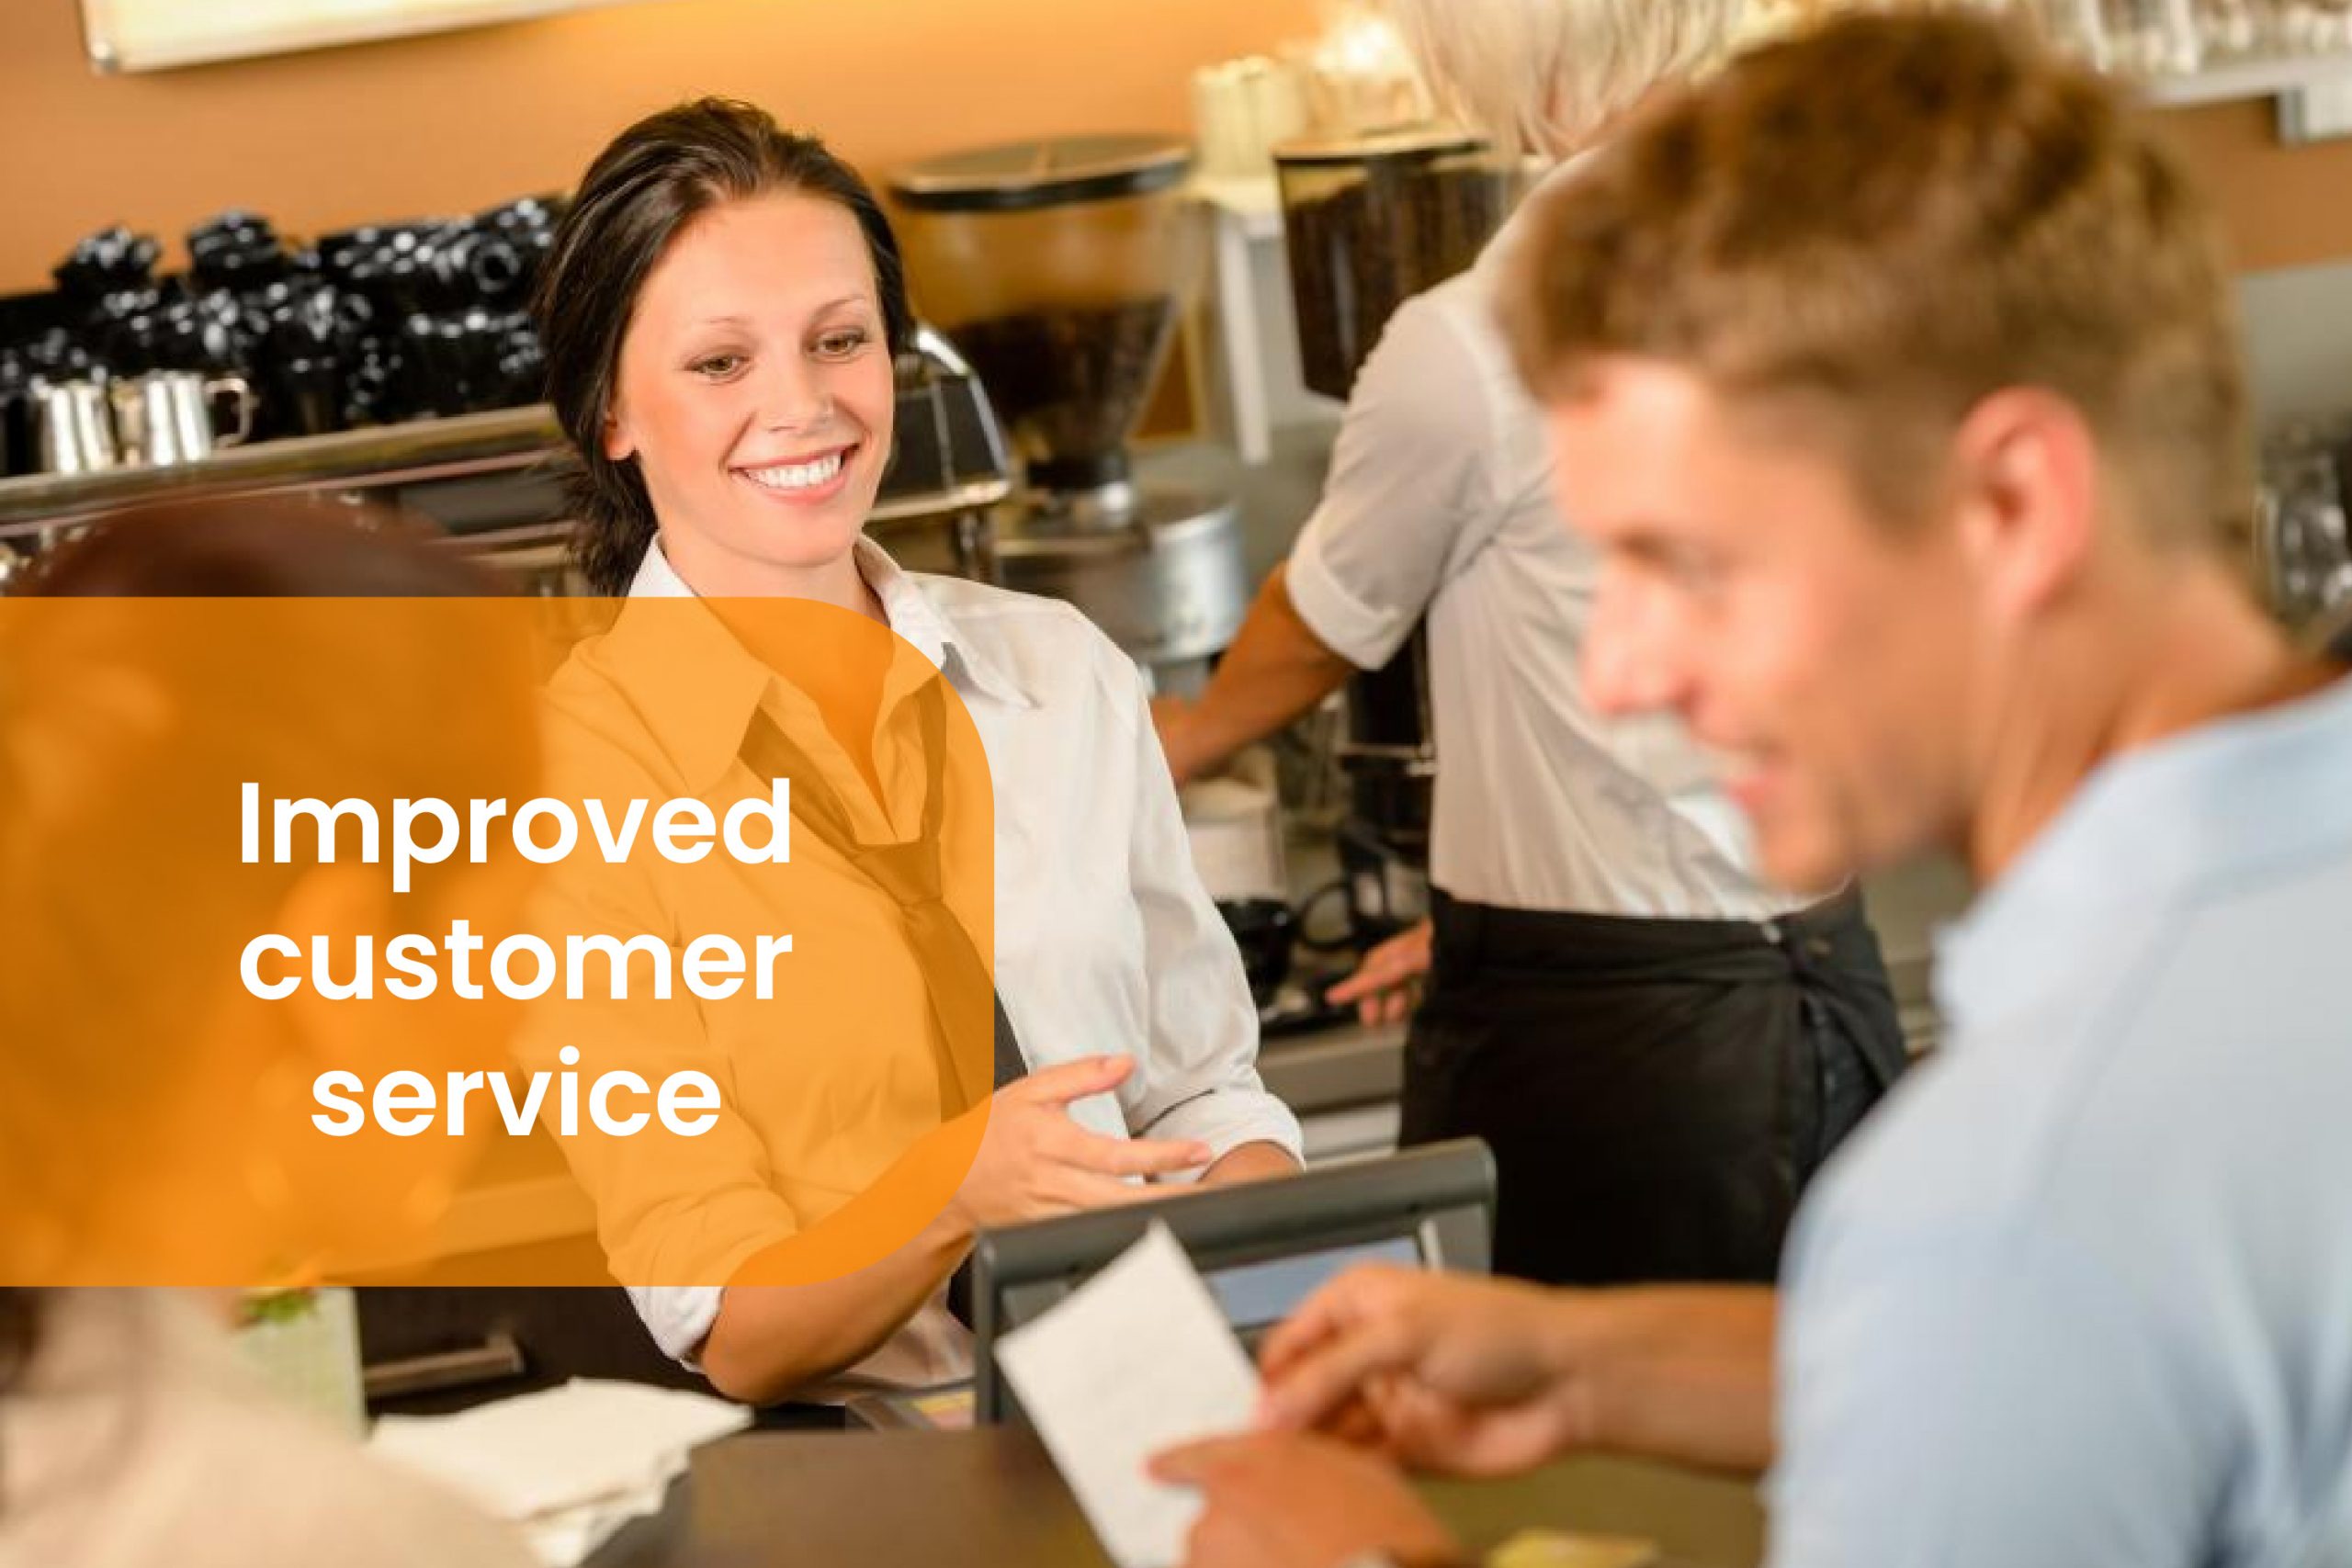 Restaurant managment software to improve customer services